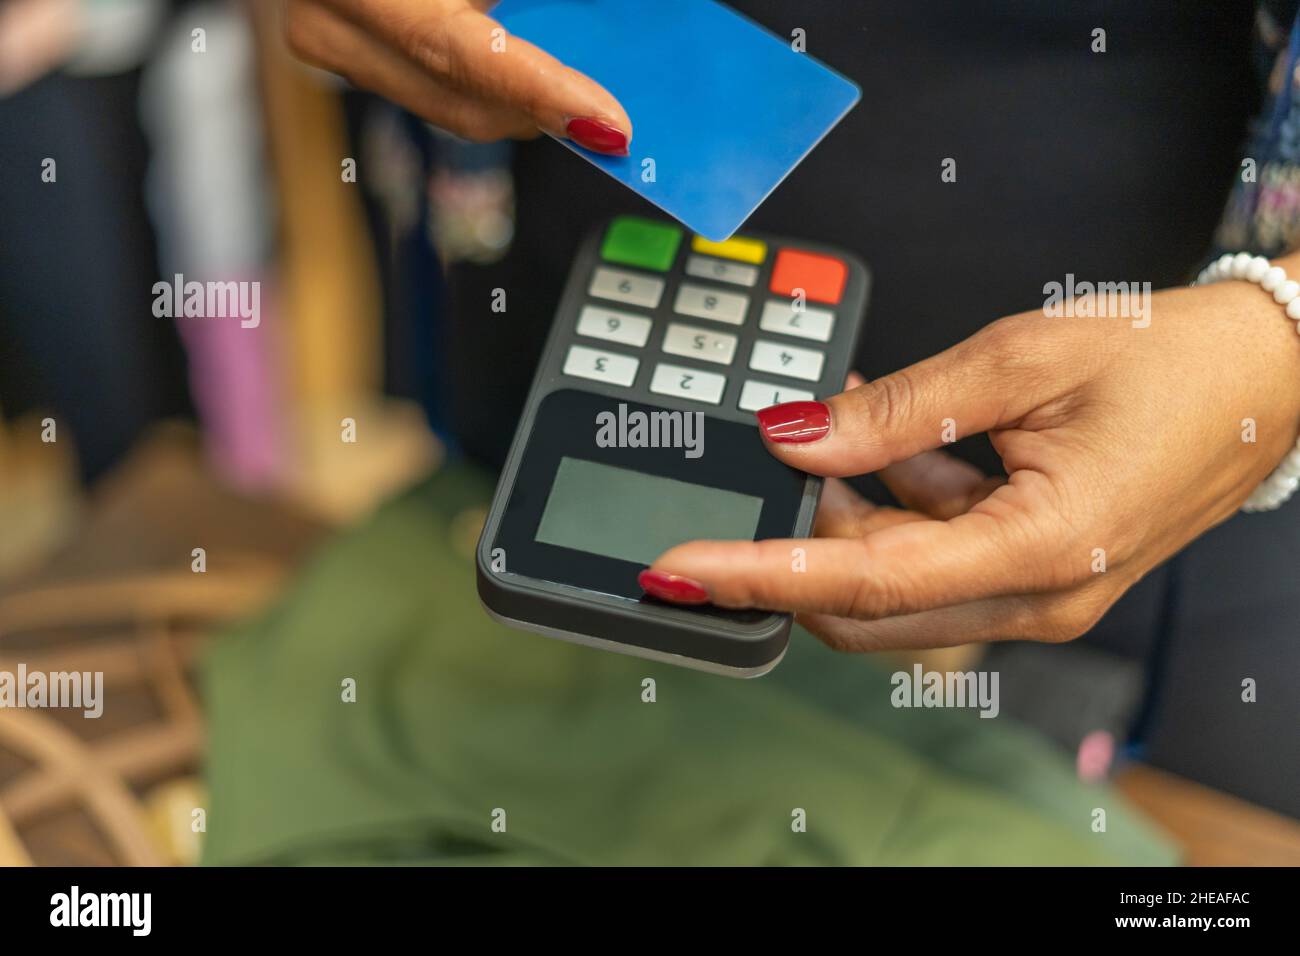 Credit card payment cashless contactless concept.Woman holding machine for customer in shop payment Stock Photo